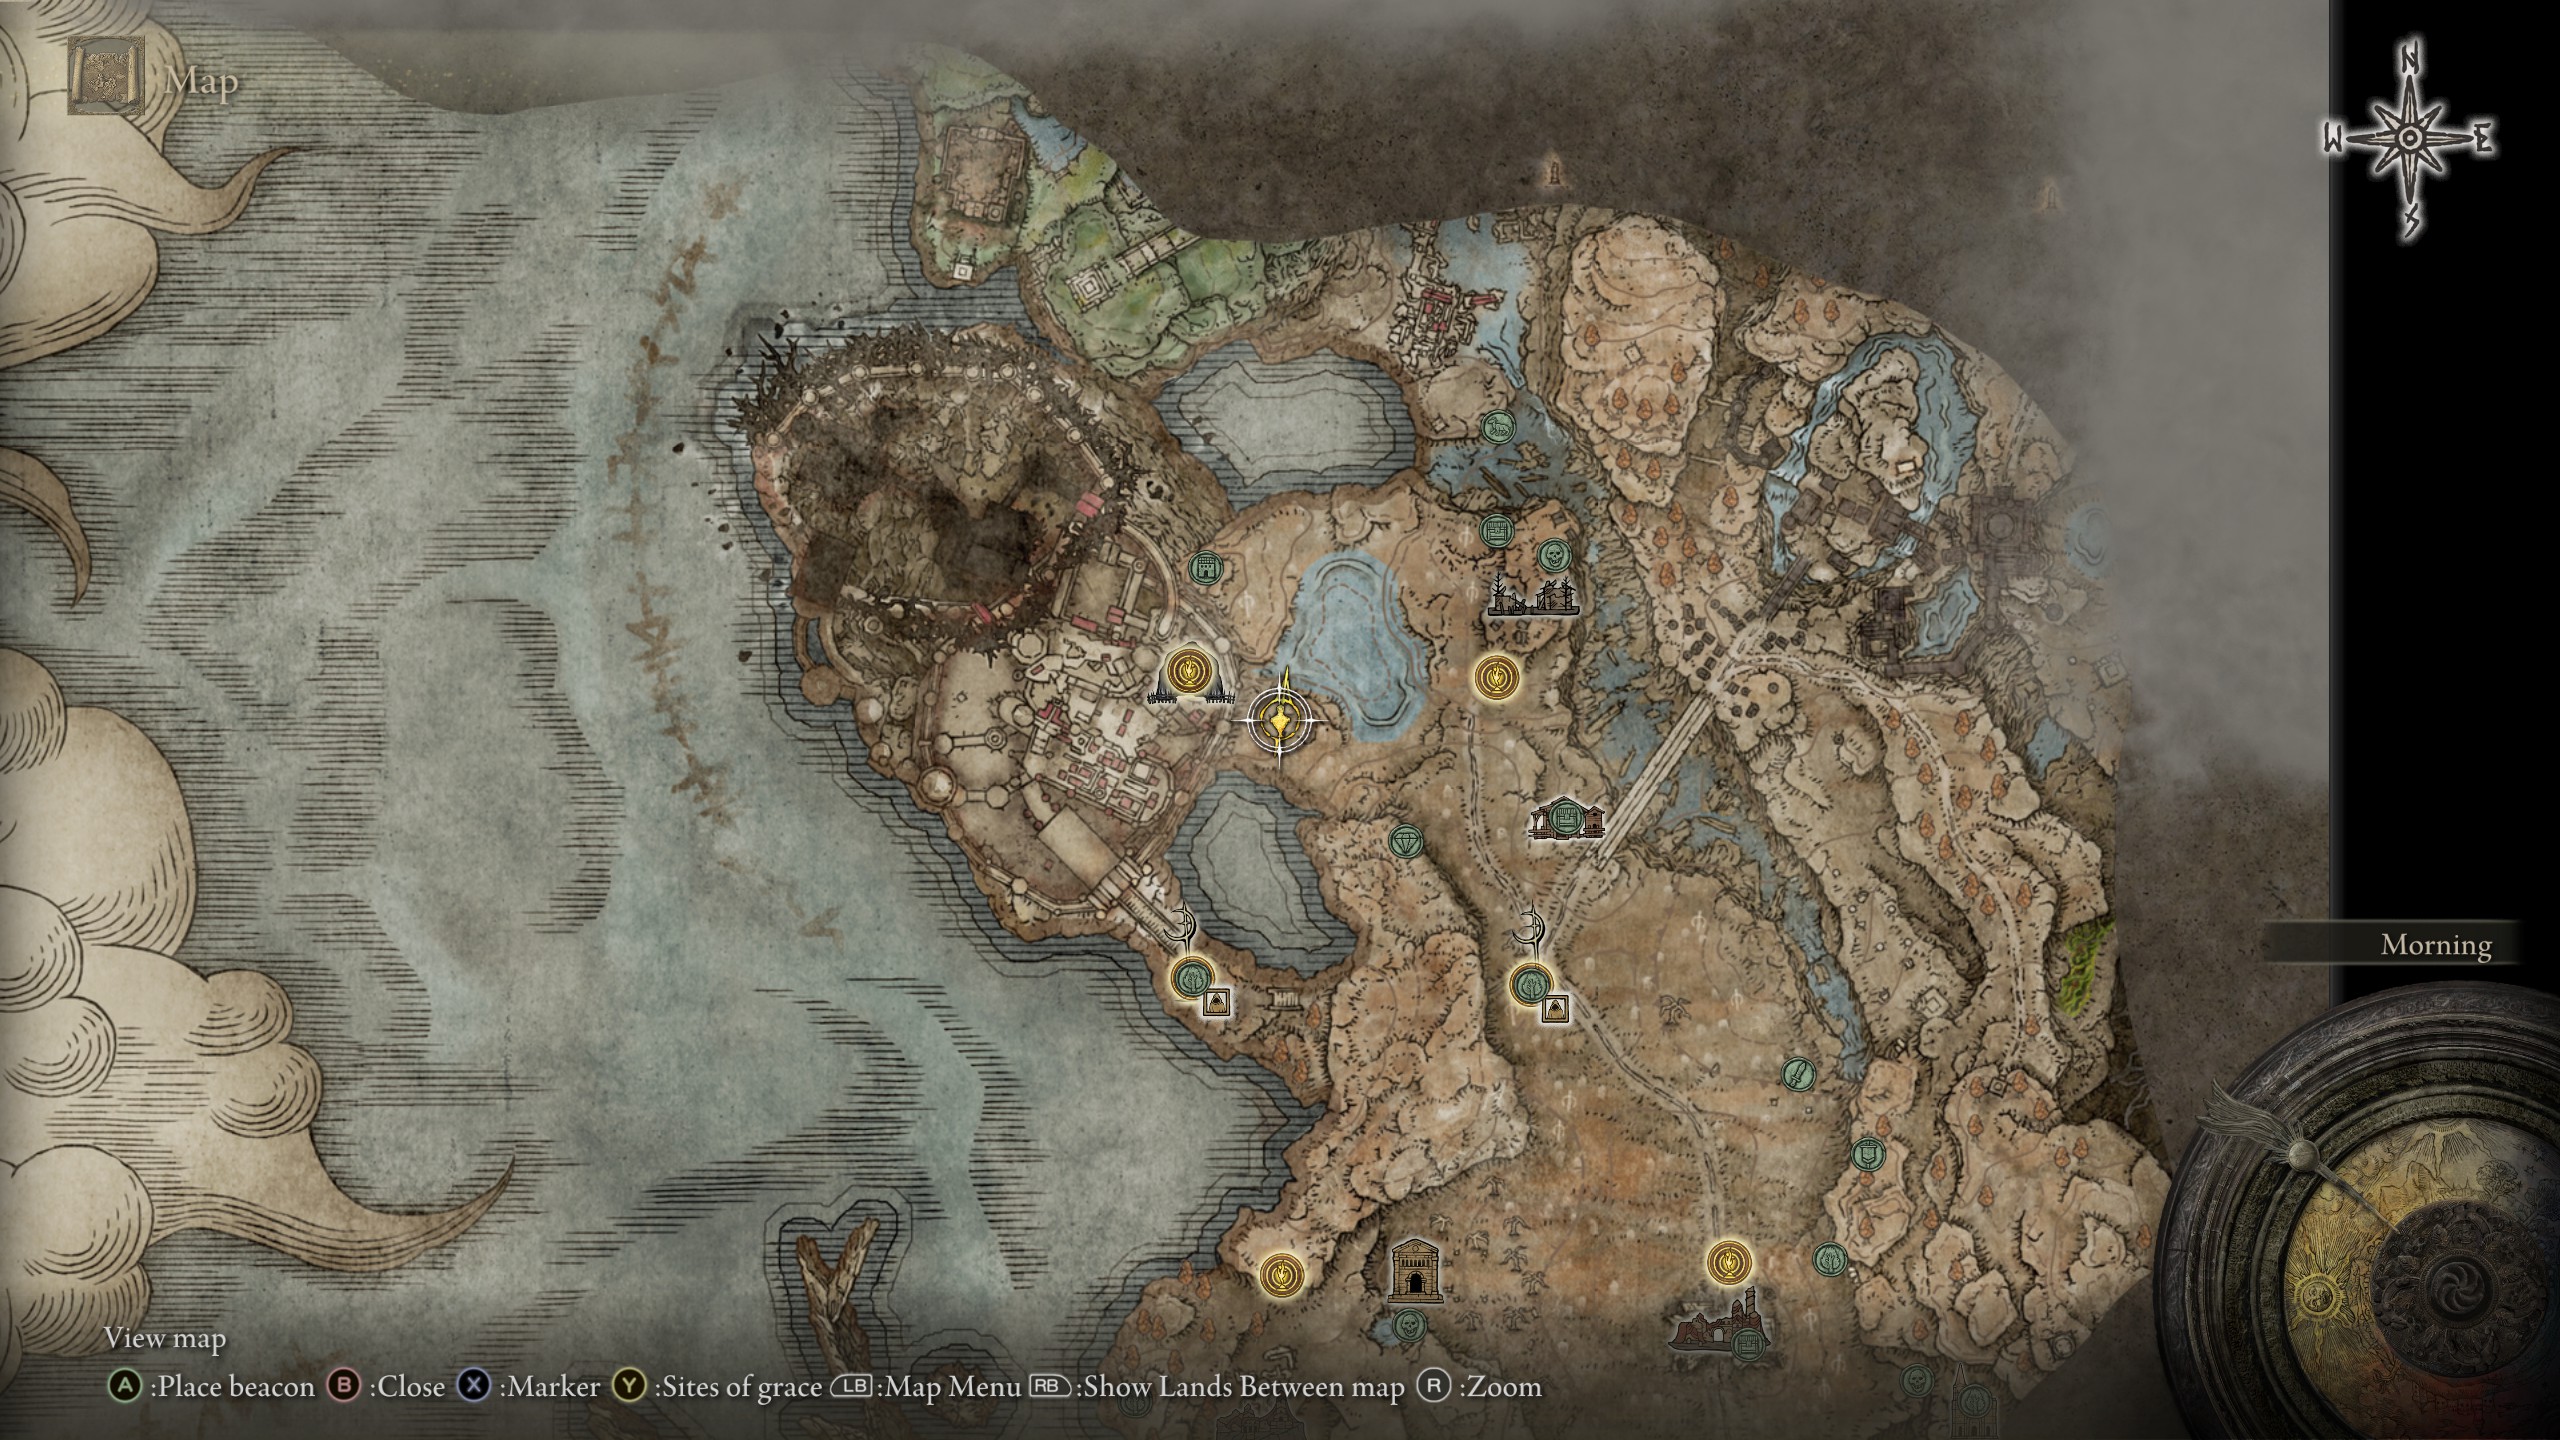 Elden Ring painting locations - Incursion painter